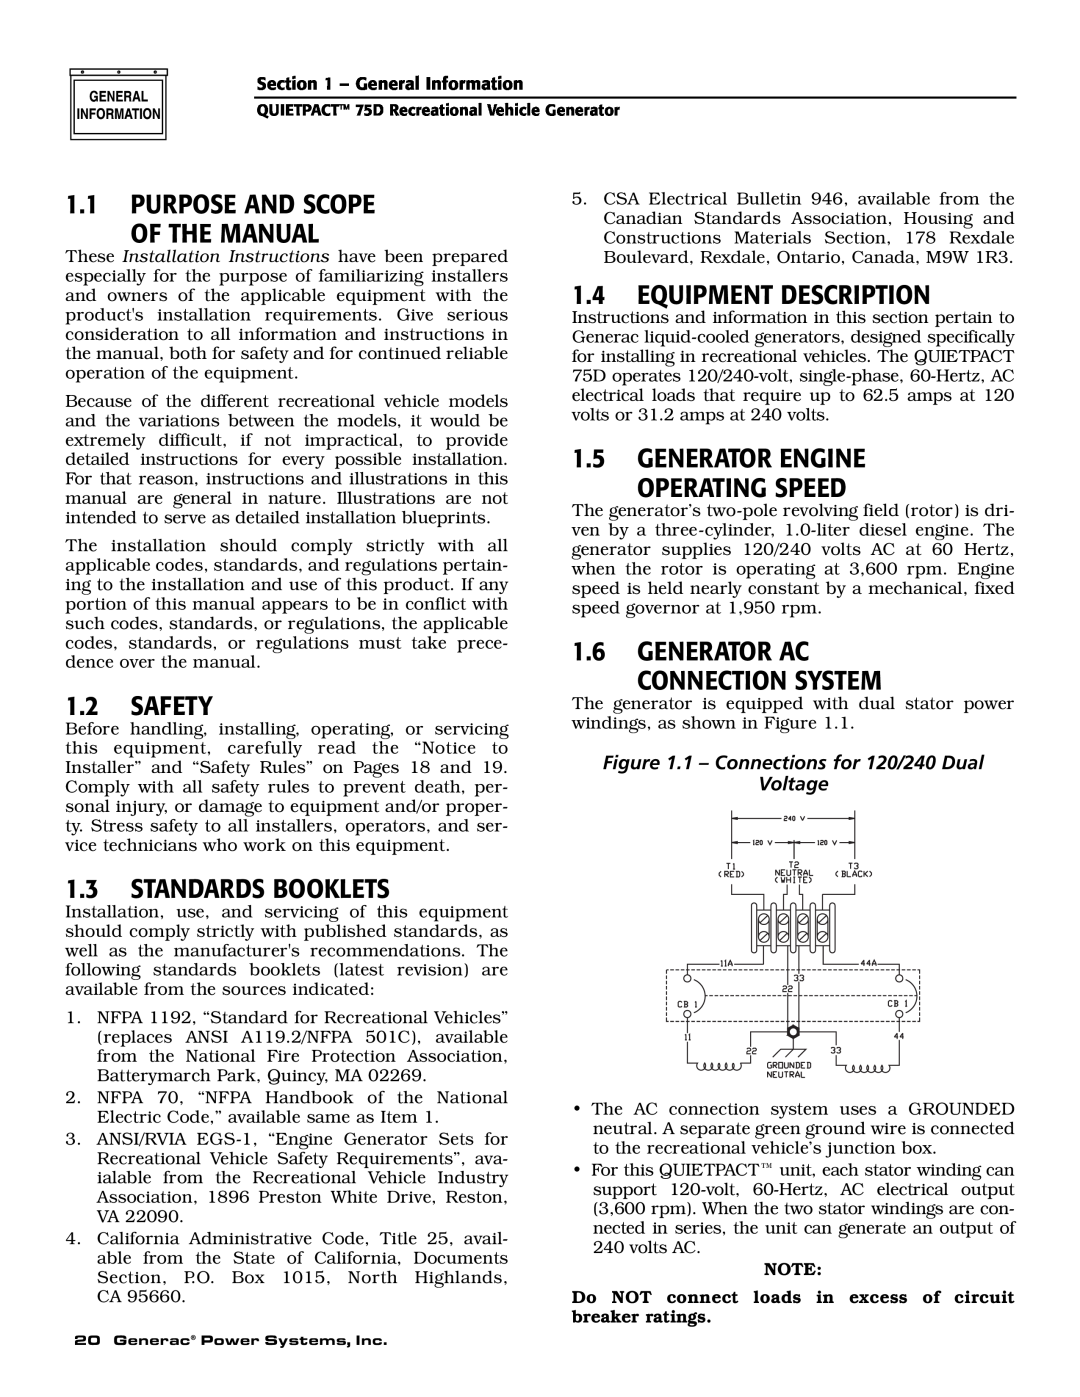 Guardian Technologies 004270-2 Purpose And Scope Of The Manual, Safety, Standards Booklets, Equipment Description 